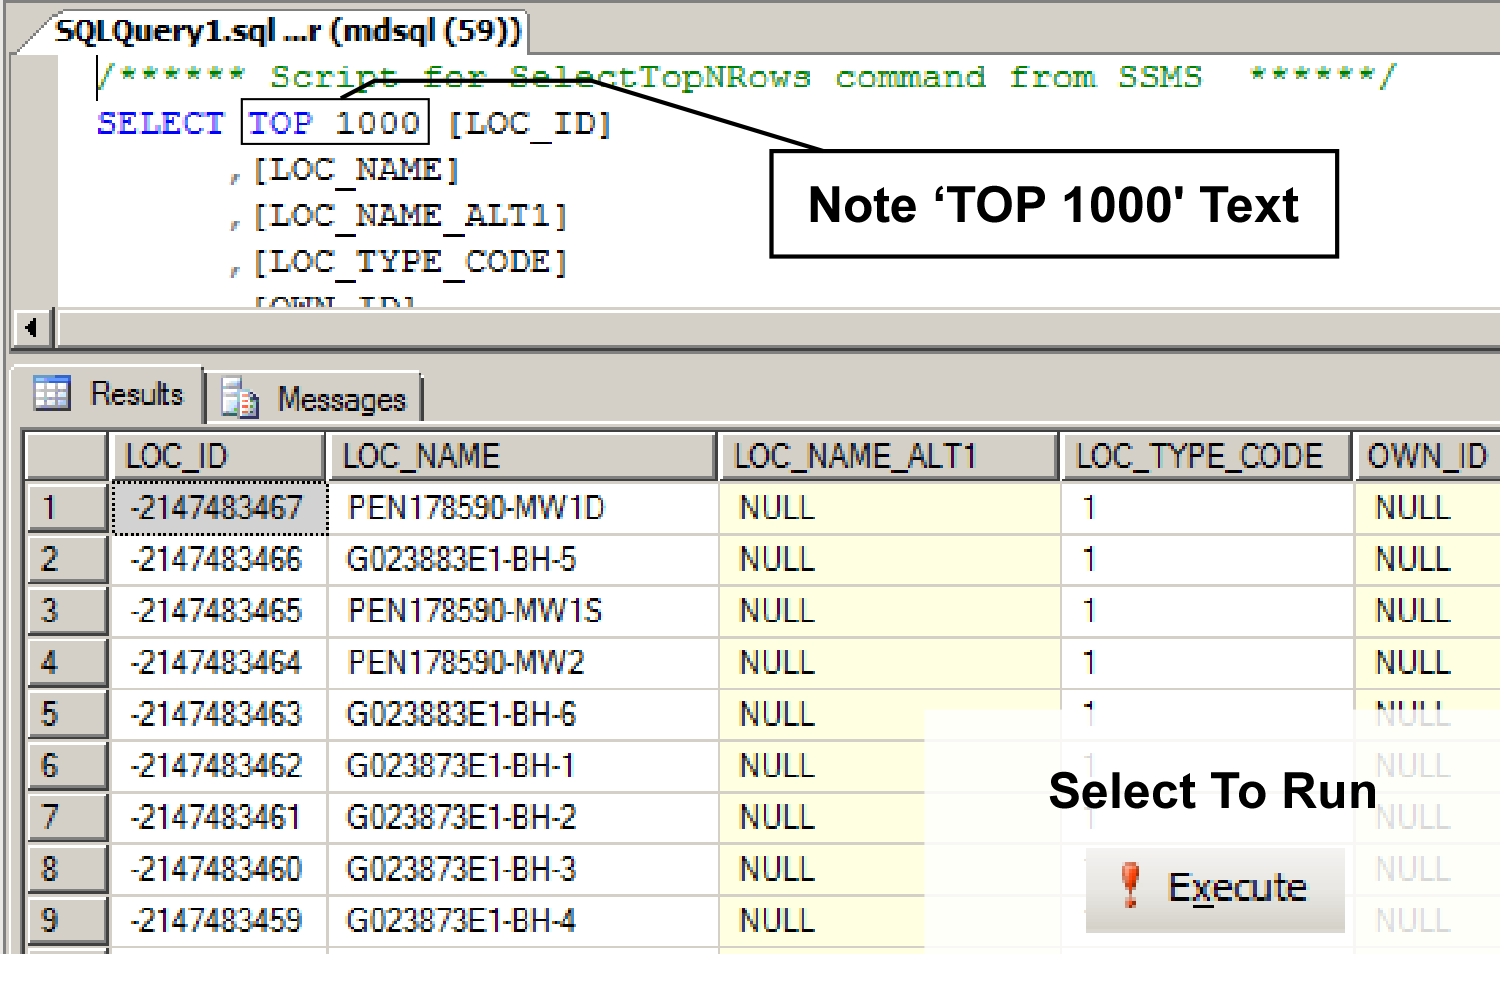 Figure 3.1.3.4 Record set returned from a successful SQL execute